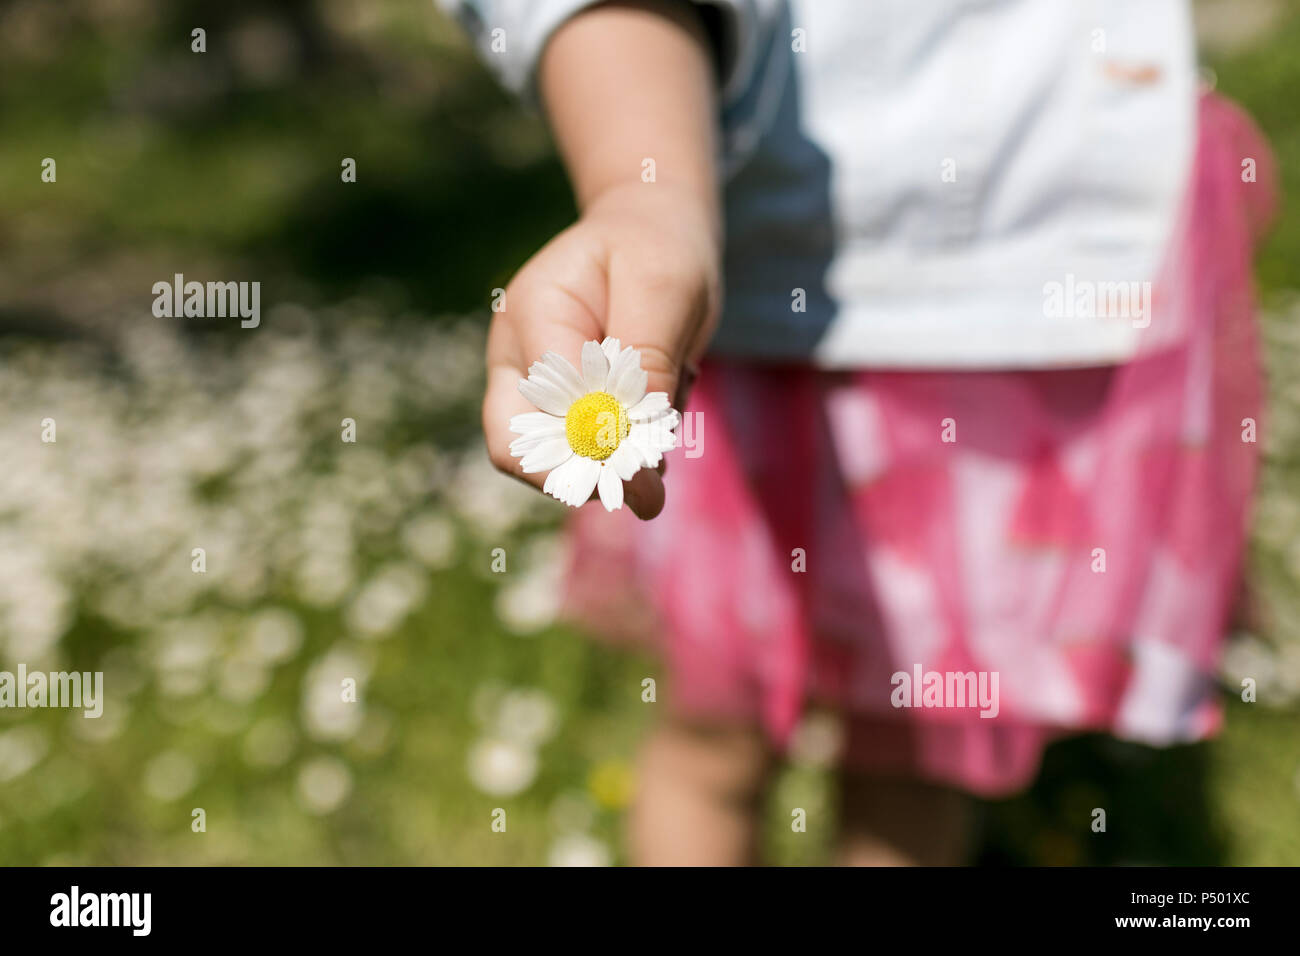 Girl's hand holding flower, close-up Banque D'Images